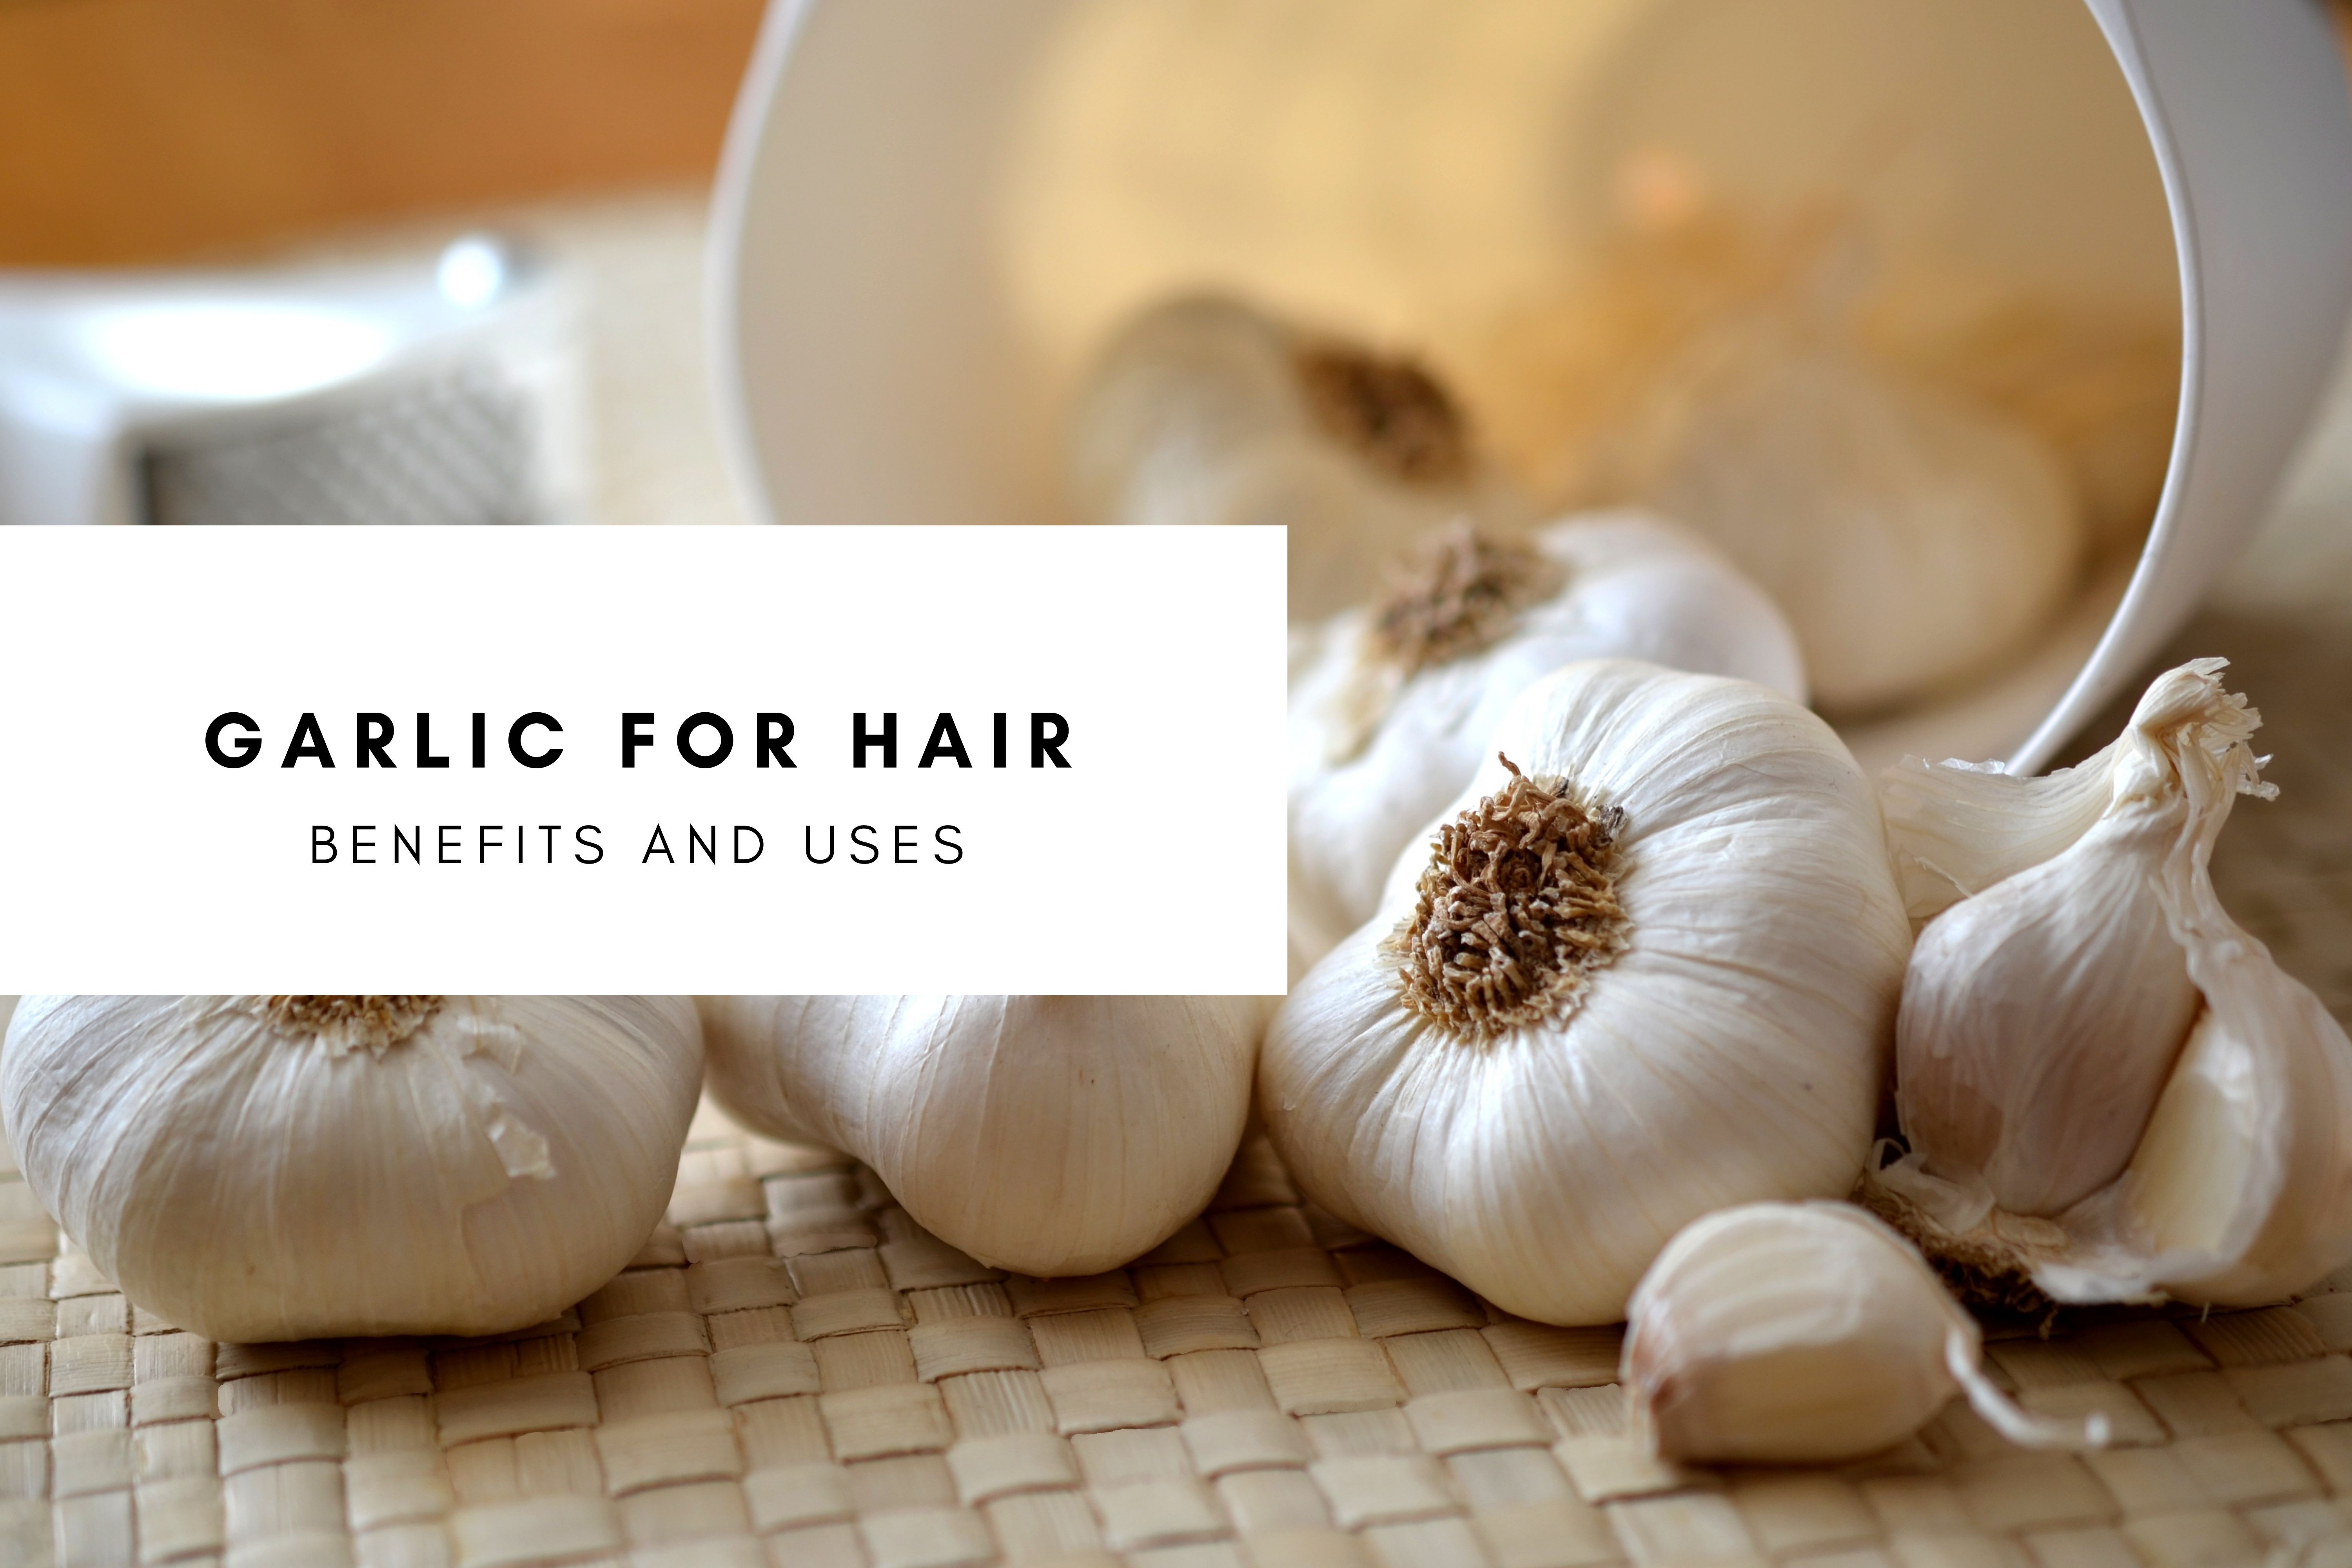 Garlic For Hair: Uses and Benefits